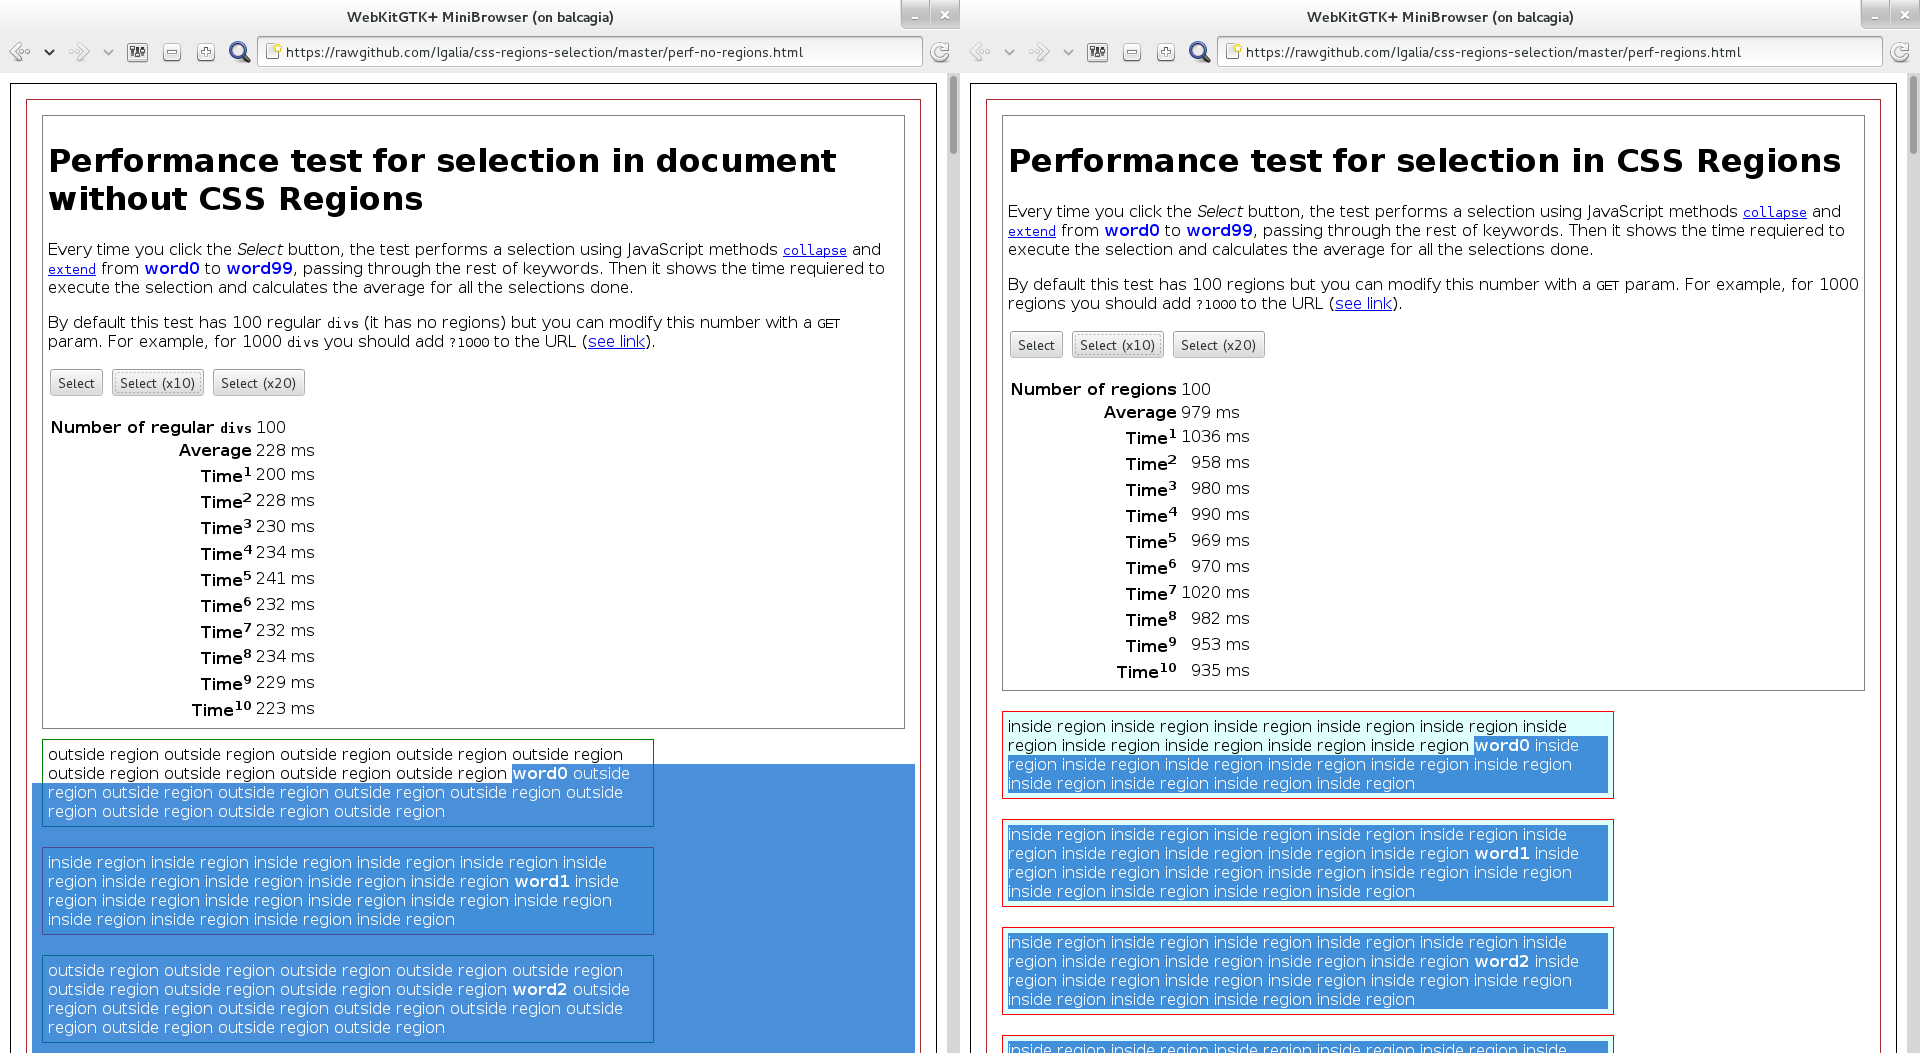 Example of selection performance in a document with and without CSS Regions in WebKitGTK+